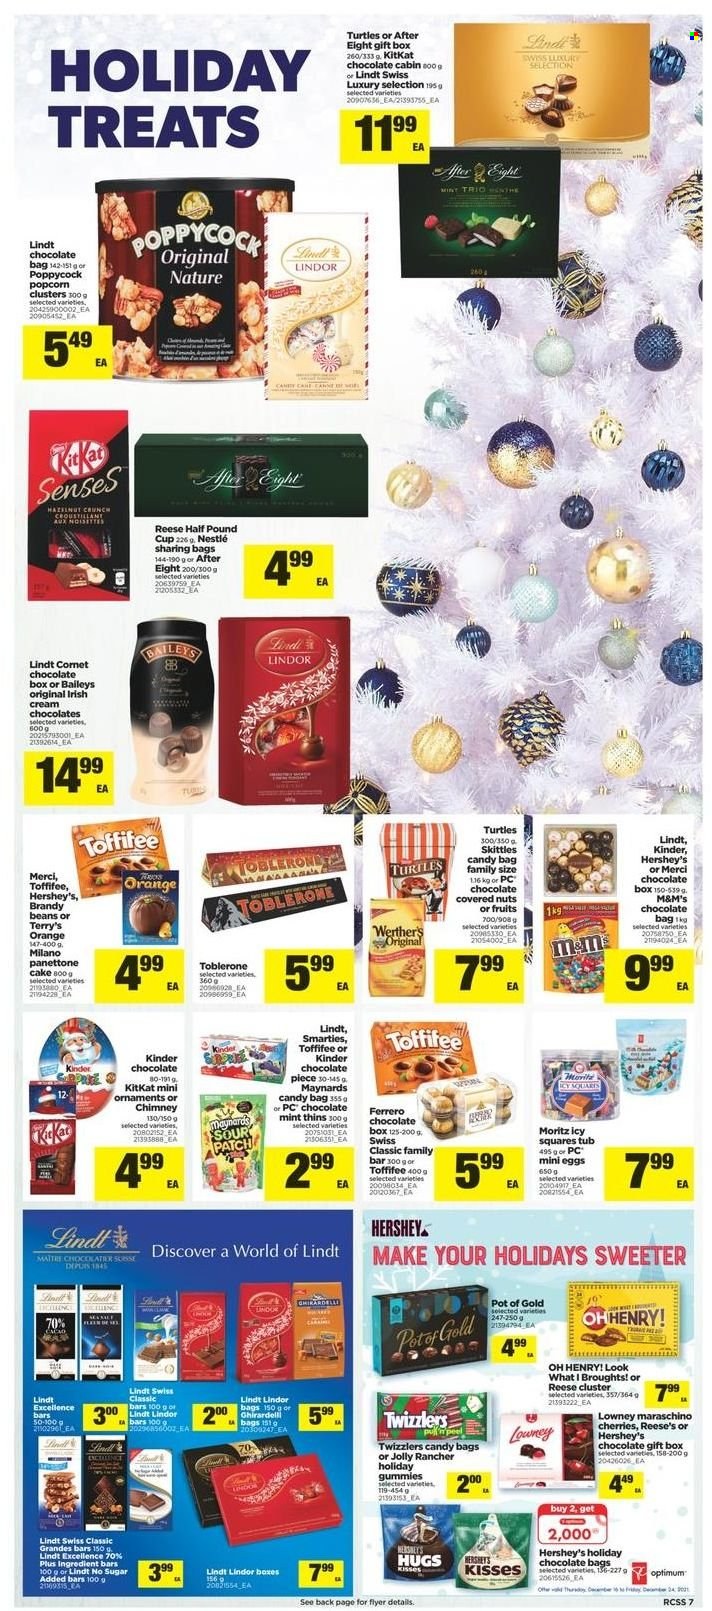 thumbnail - Real Canadian Superstore Flyer - December 16, 2021 - December 24, 2021 - Sales products - cake, panettone, beans, Reese's, Hershey's, chocolate, KitKat, Toblerone, After Eight, Merci, Skittles, Sour Patch, Thins, popcorn, Maraschino cherries, brandy, irish cream, Baileys, pot, cup, turtles, Optimum, Nestlé, Lindt, Lindor, Ferrero Rocher, Smarties, oranges, M&M's. Page 7.